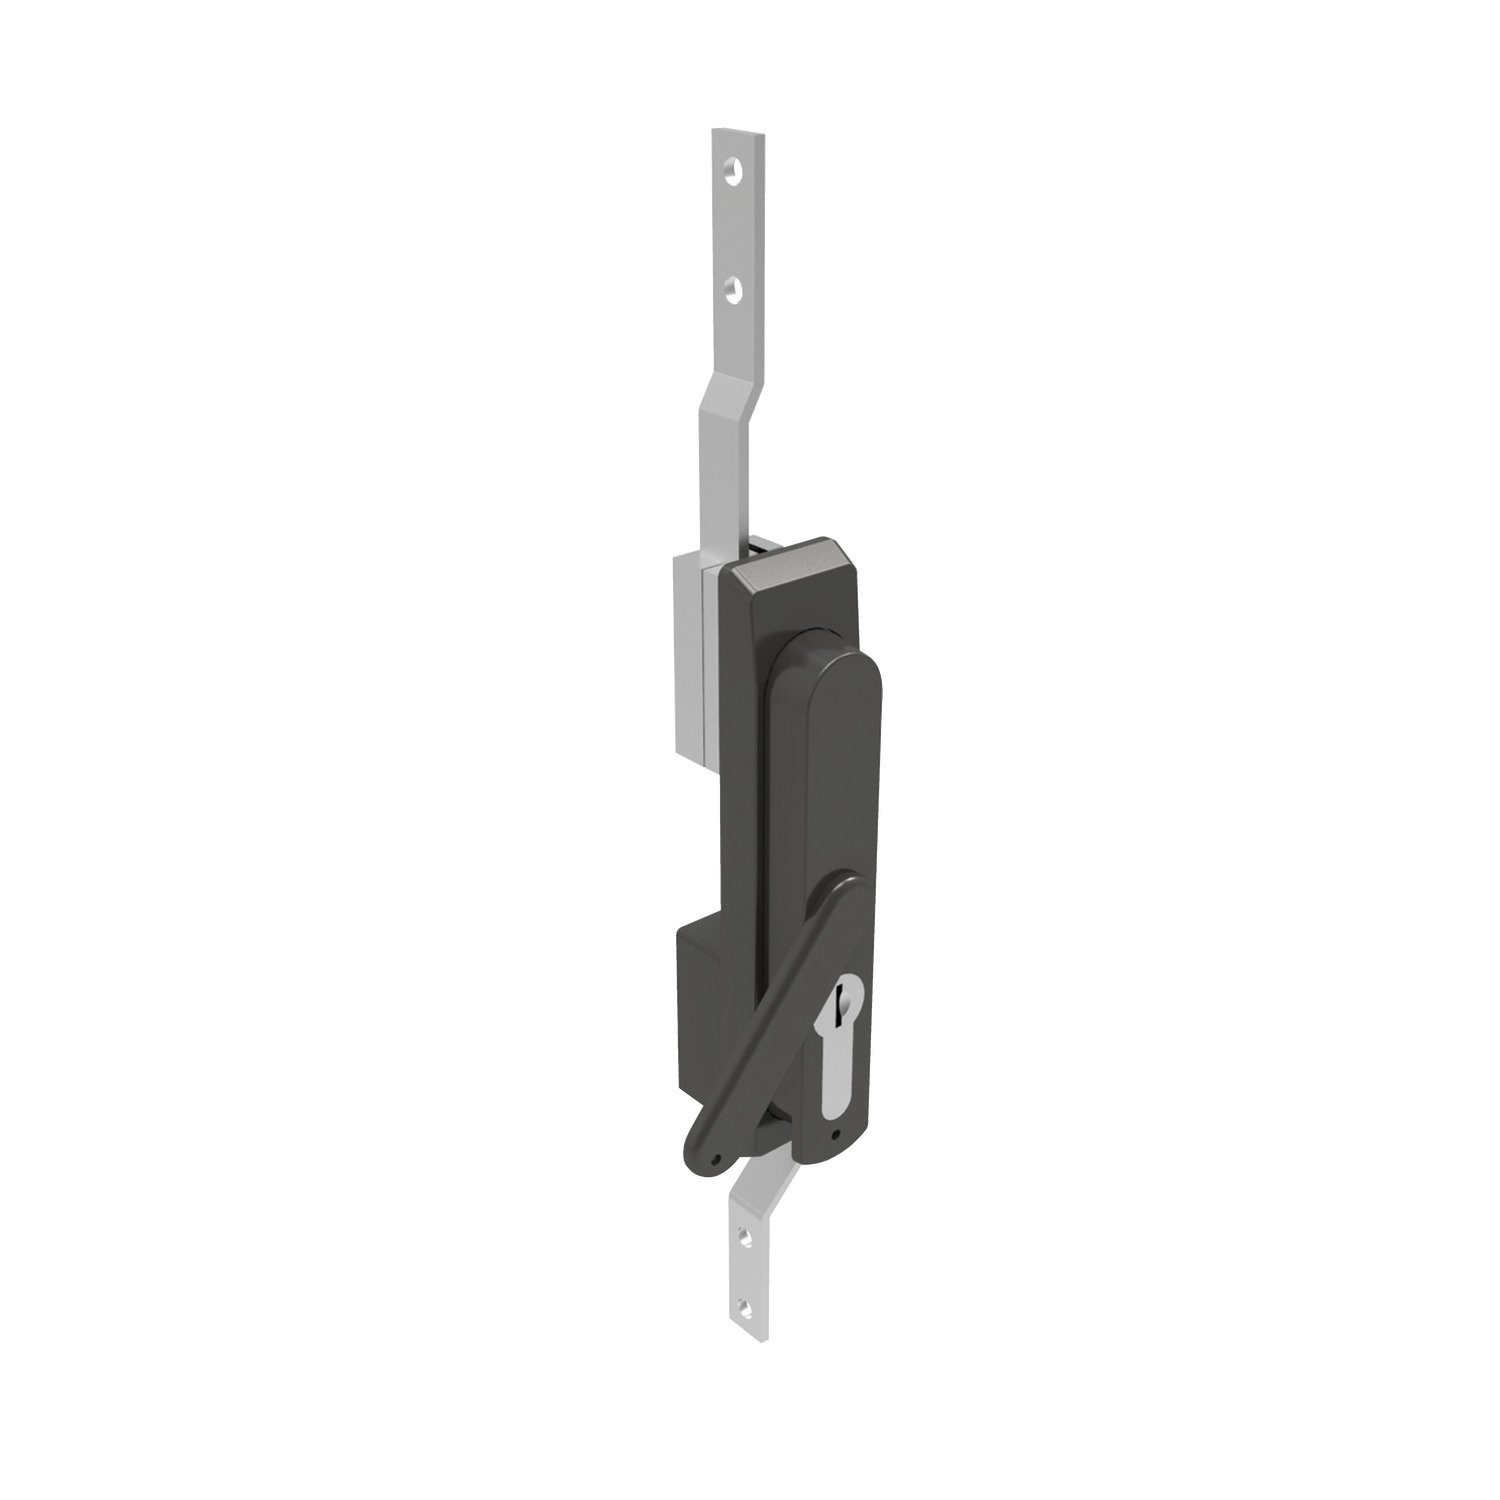 B2082 - Swing Handles - with Rod Control